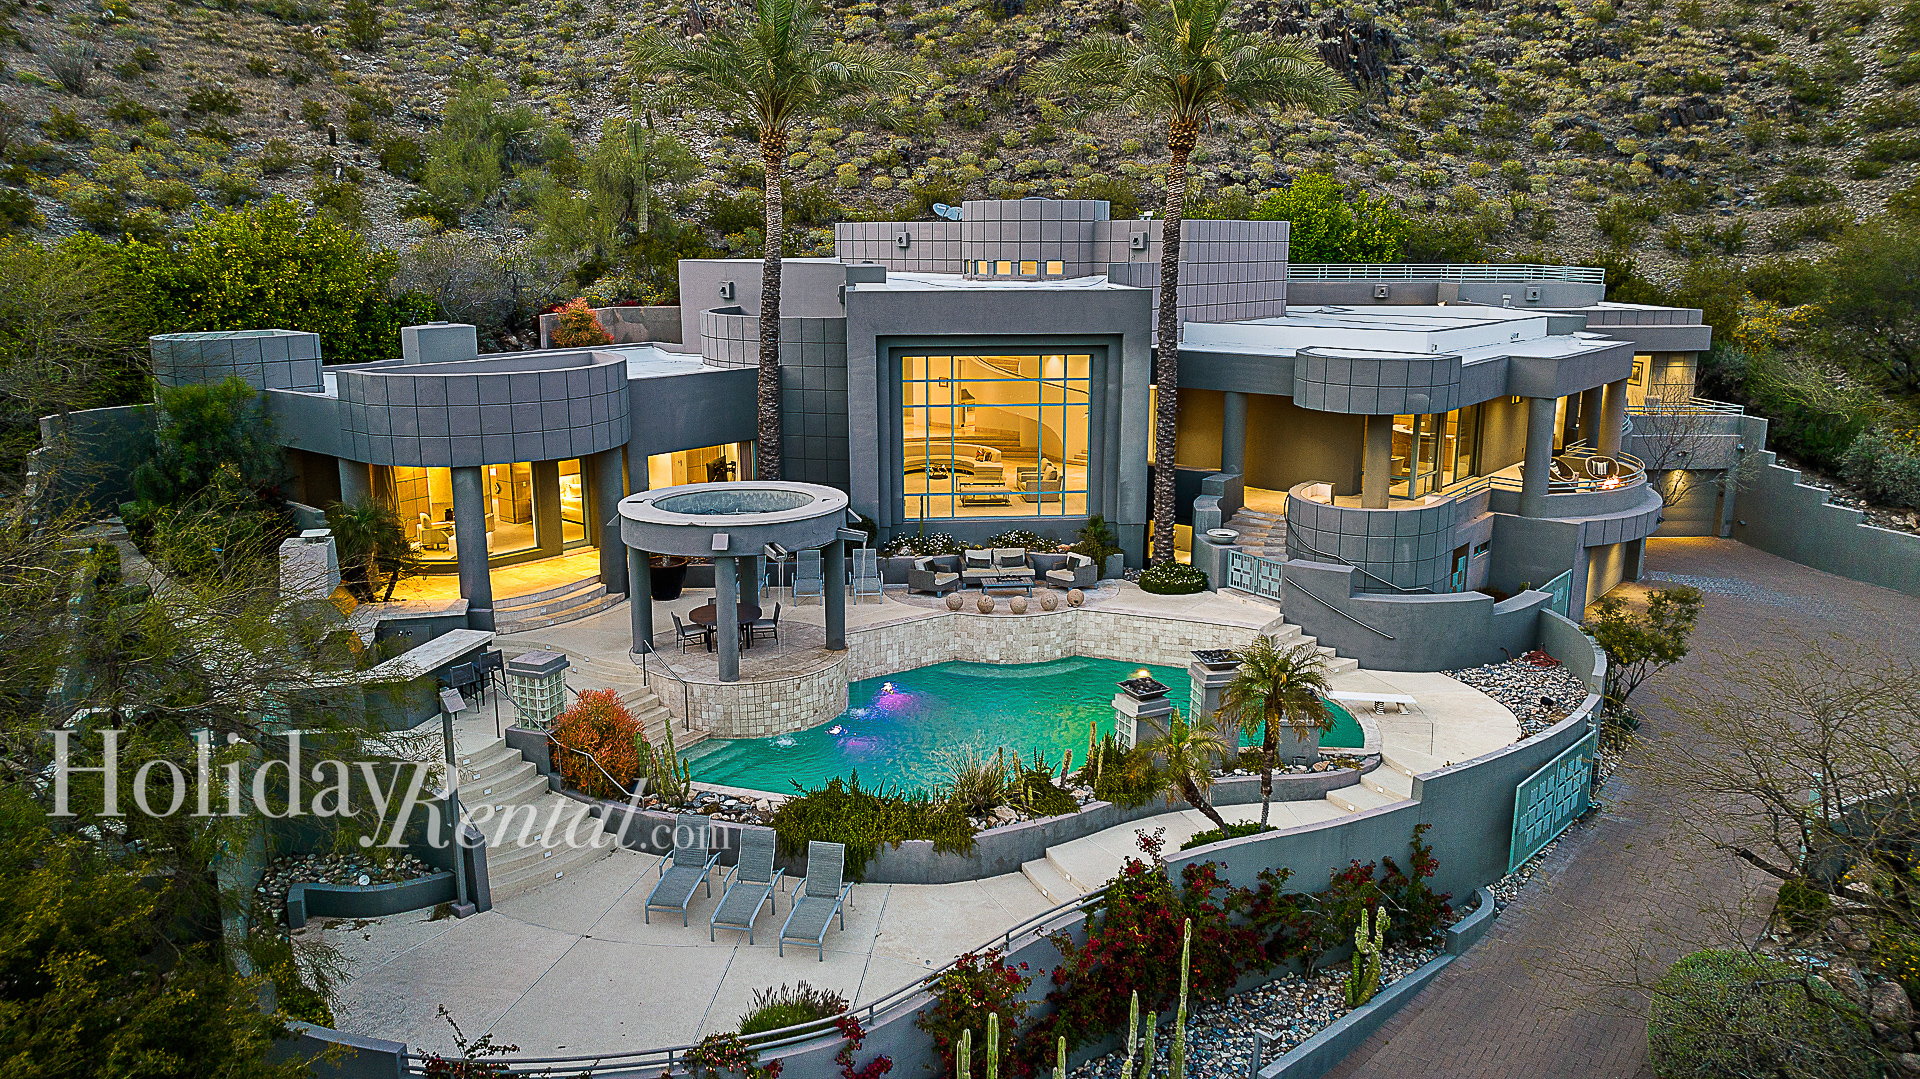 Paradise Valley Mansion